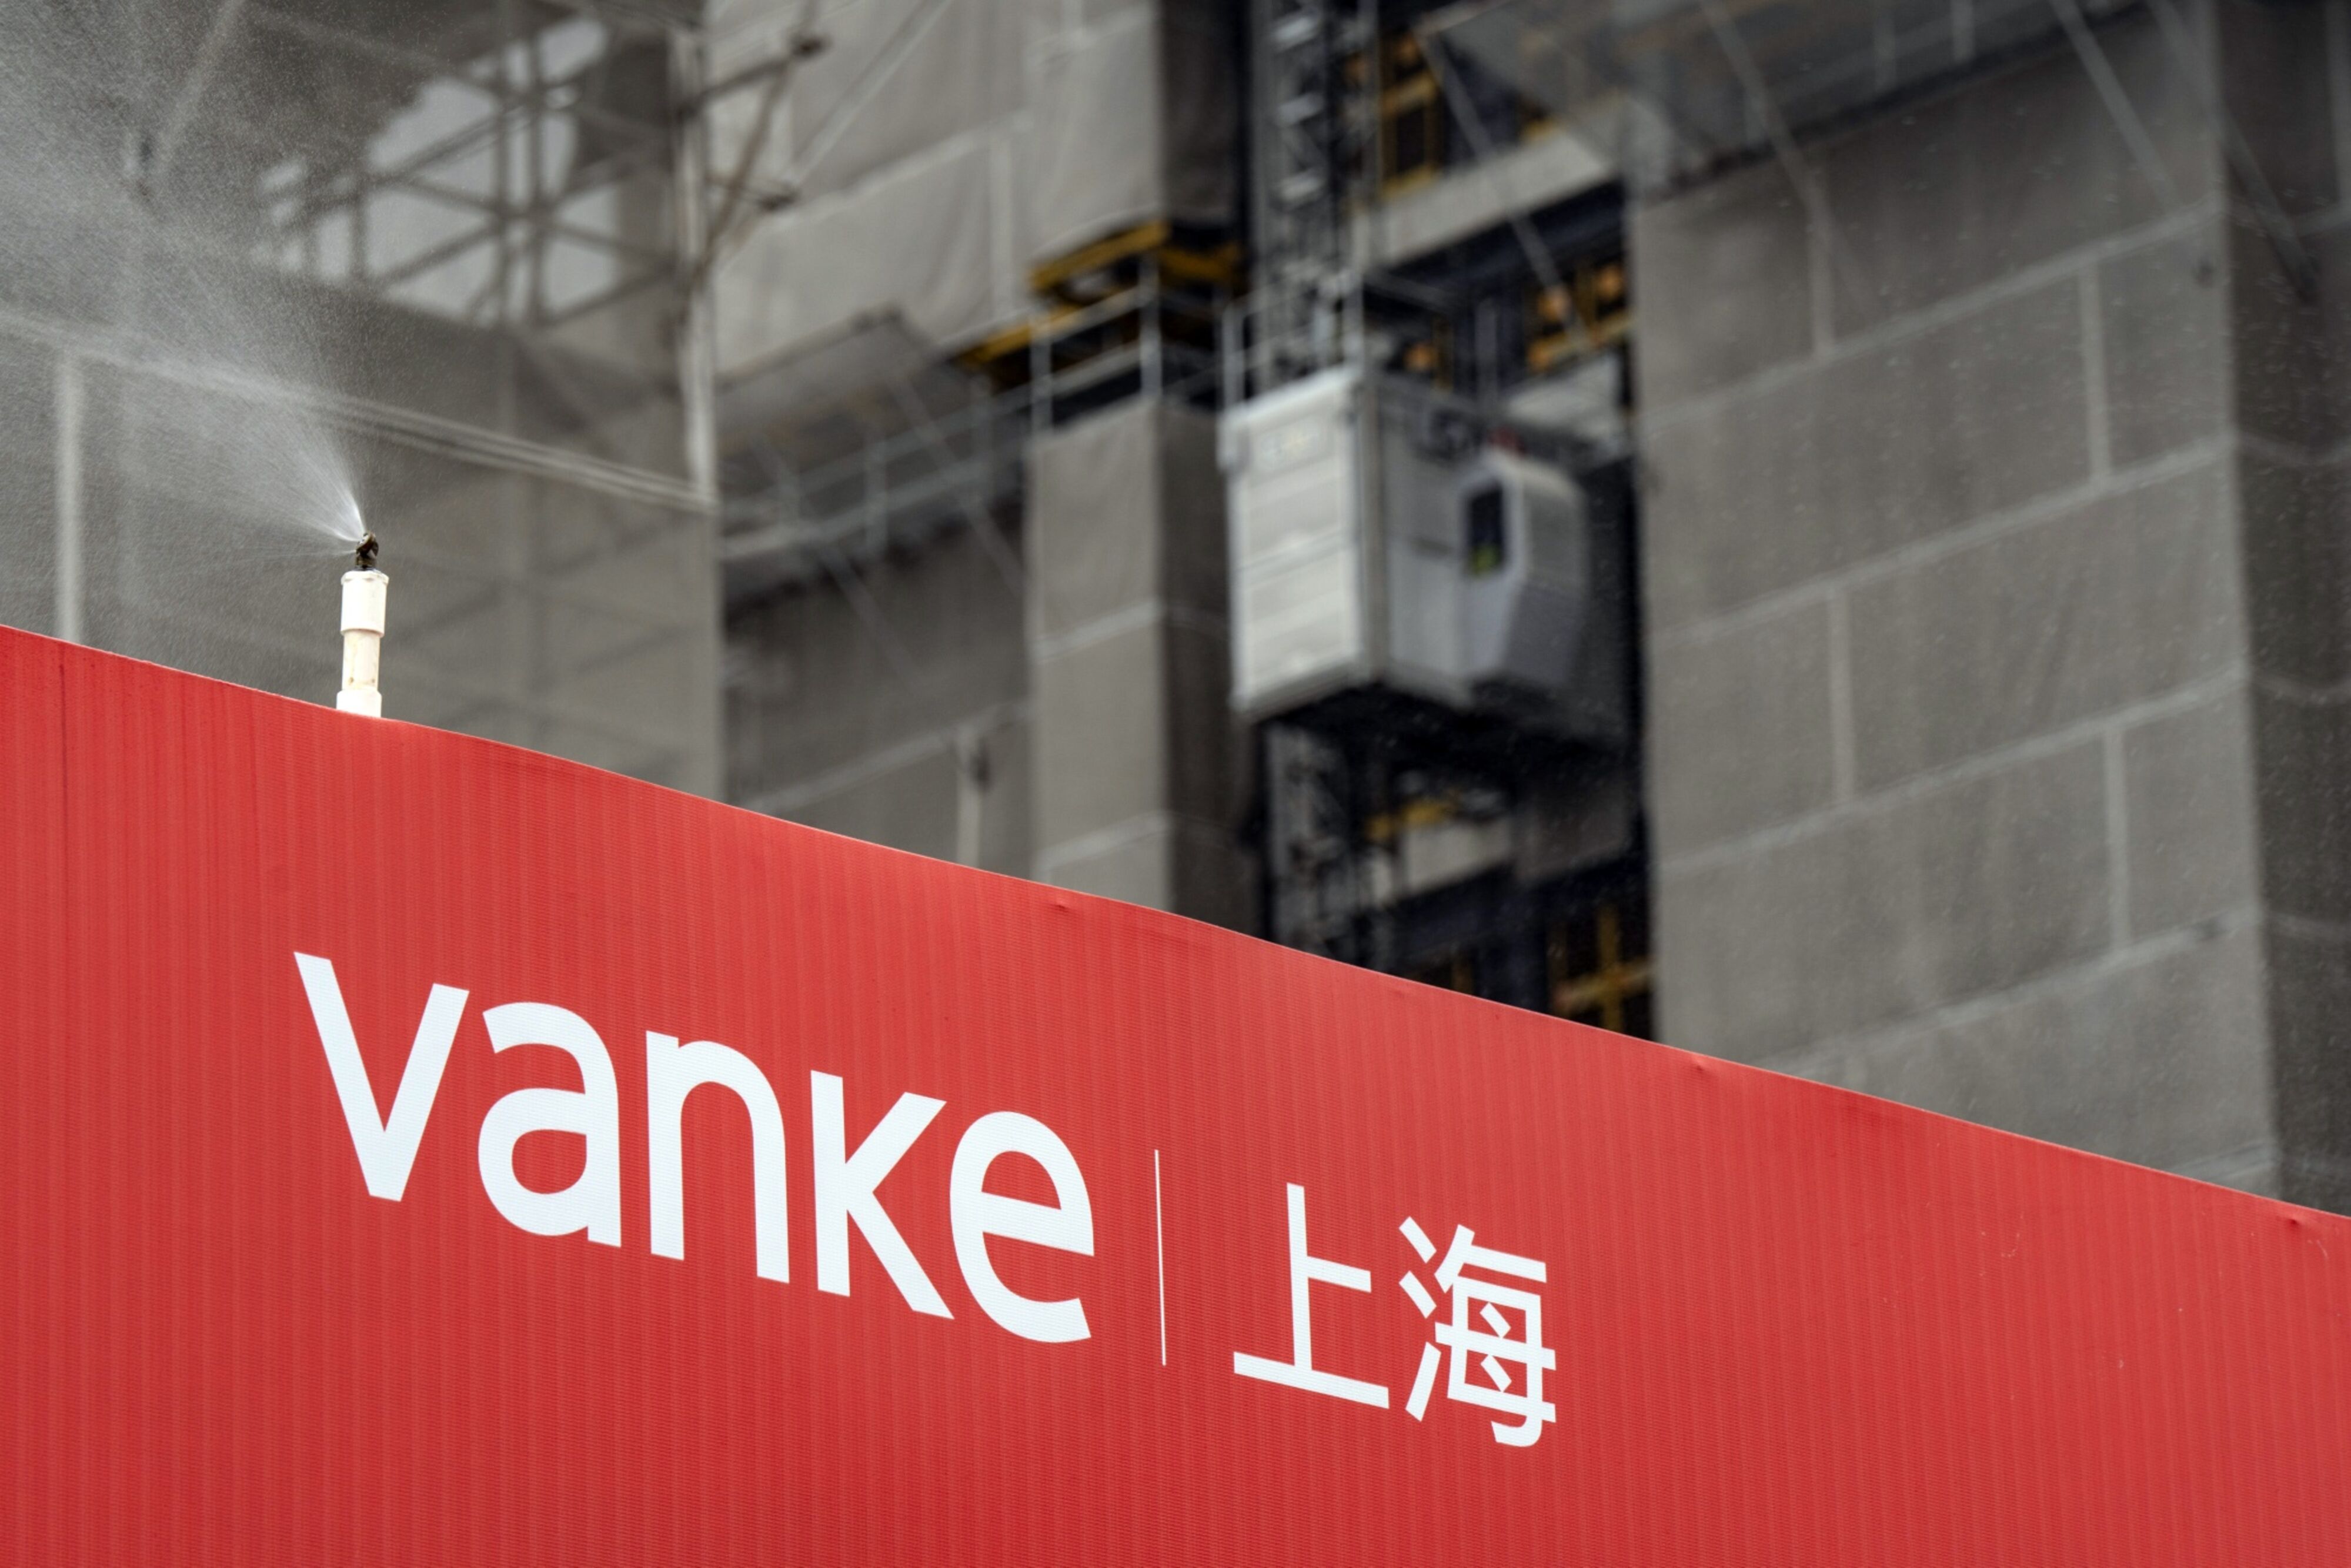 Vanke’s onshore and offshore shares have been downgraded to underweight from neutral by JPMorgan, which slashed its price targets on both by more than 25%. Photo: Bloomberg